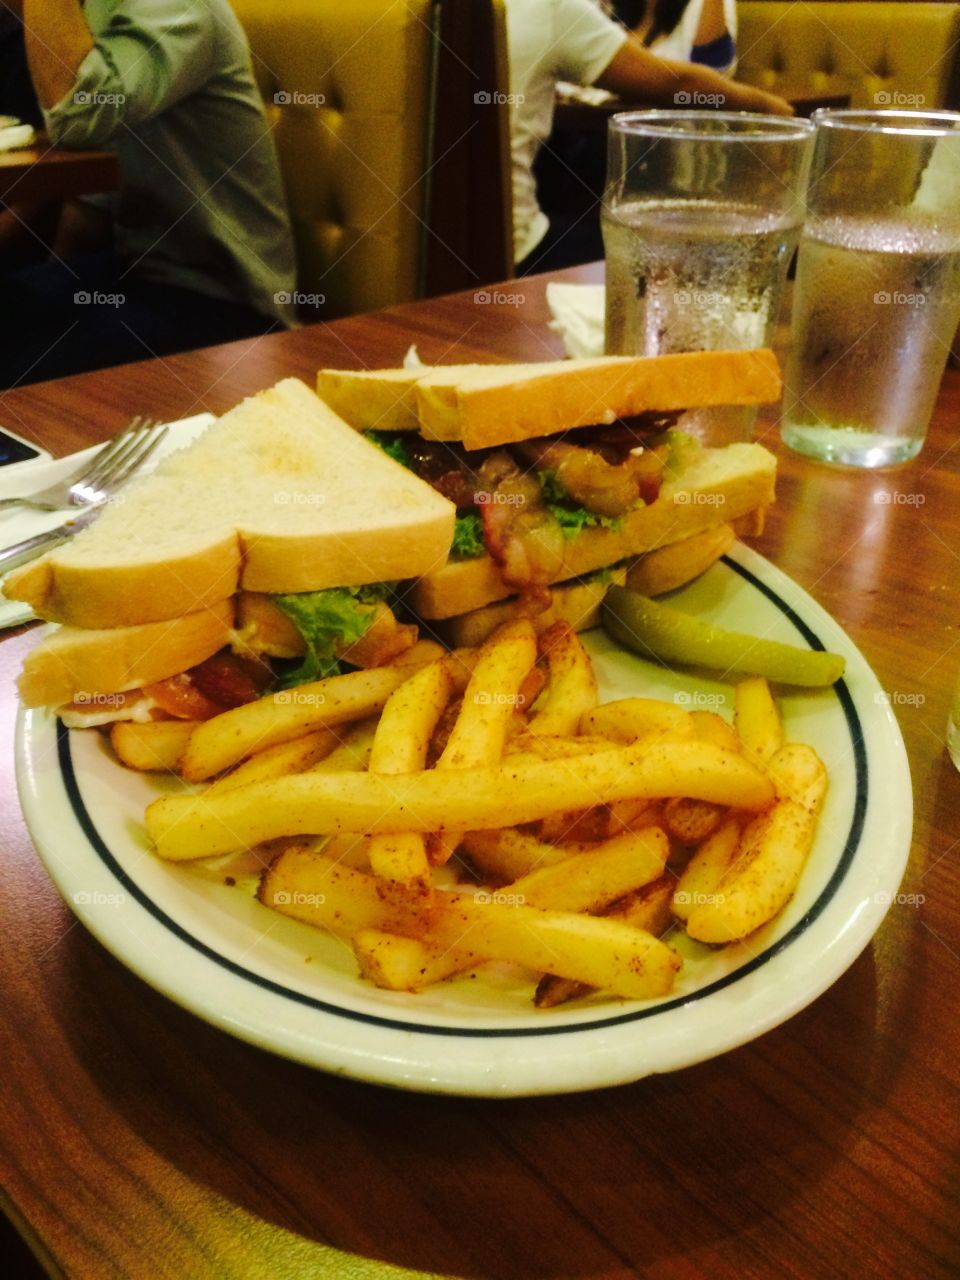 Clubhouse Sandwich 